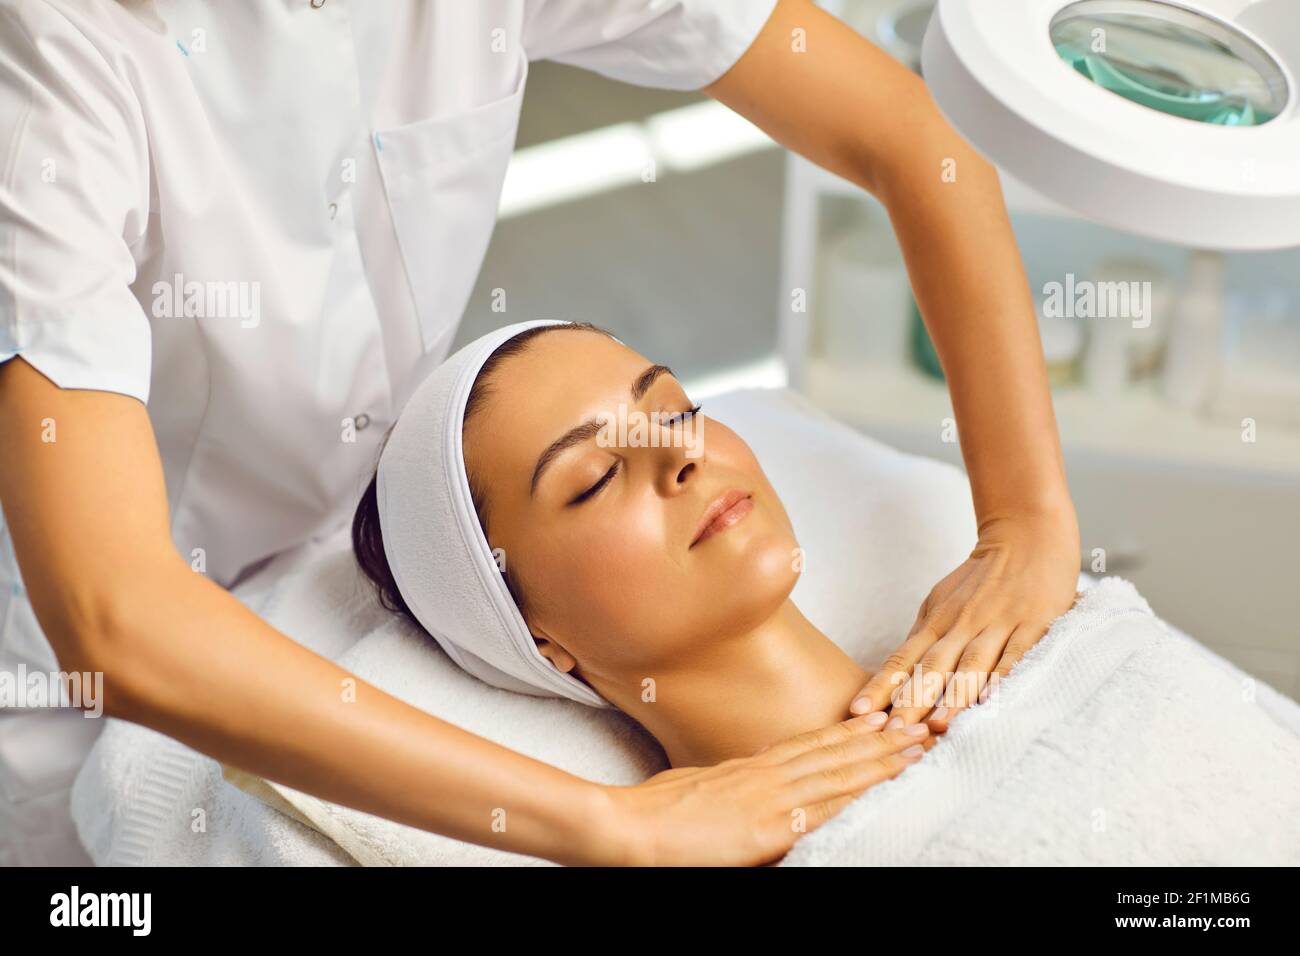 https://c8.alamy.com/comp/2F1MB6G/cosmetologist-or-masseur-making-facial-massage-with-upper-shoulder-girdle-for-woman-in-beauty-salon-2F1MB6G.jpg